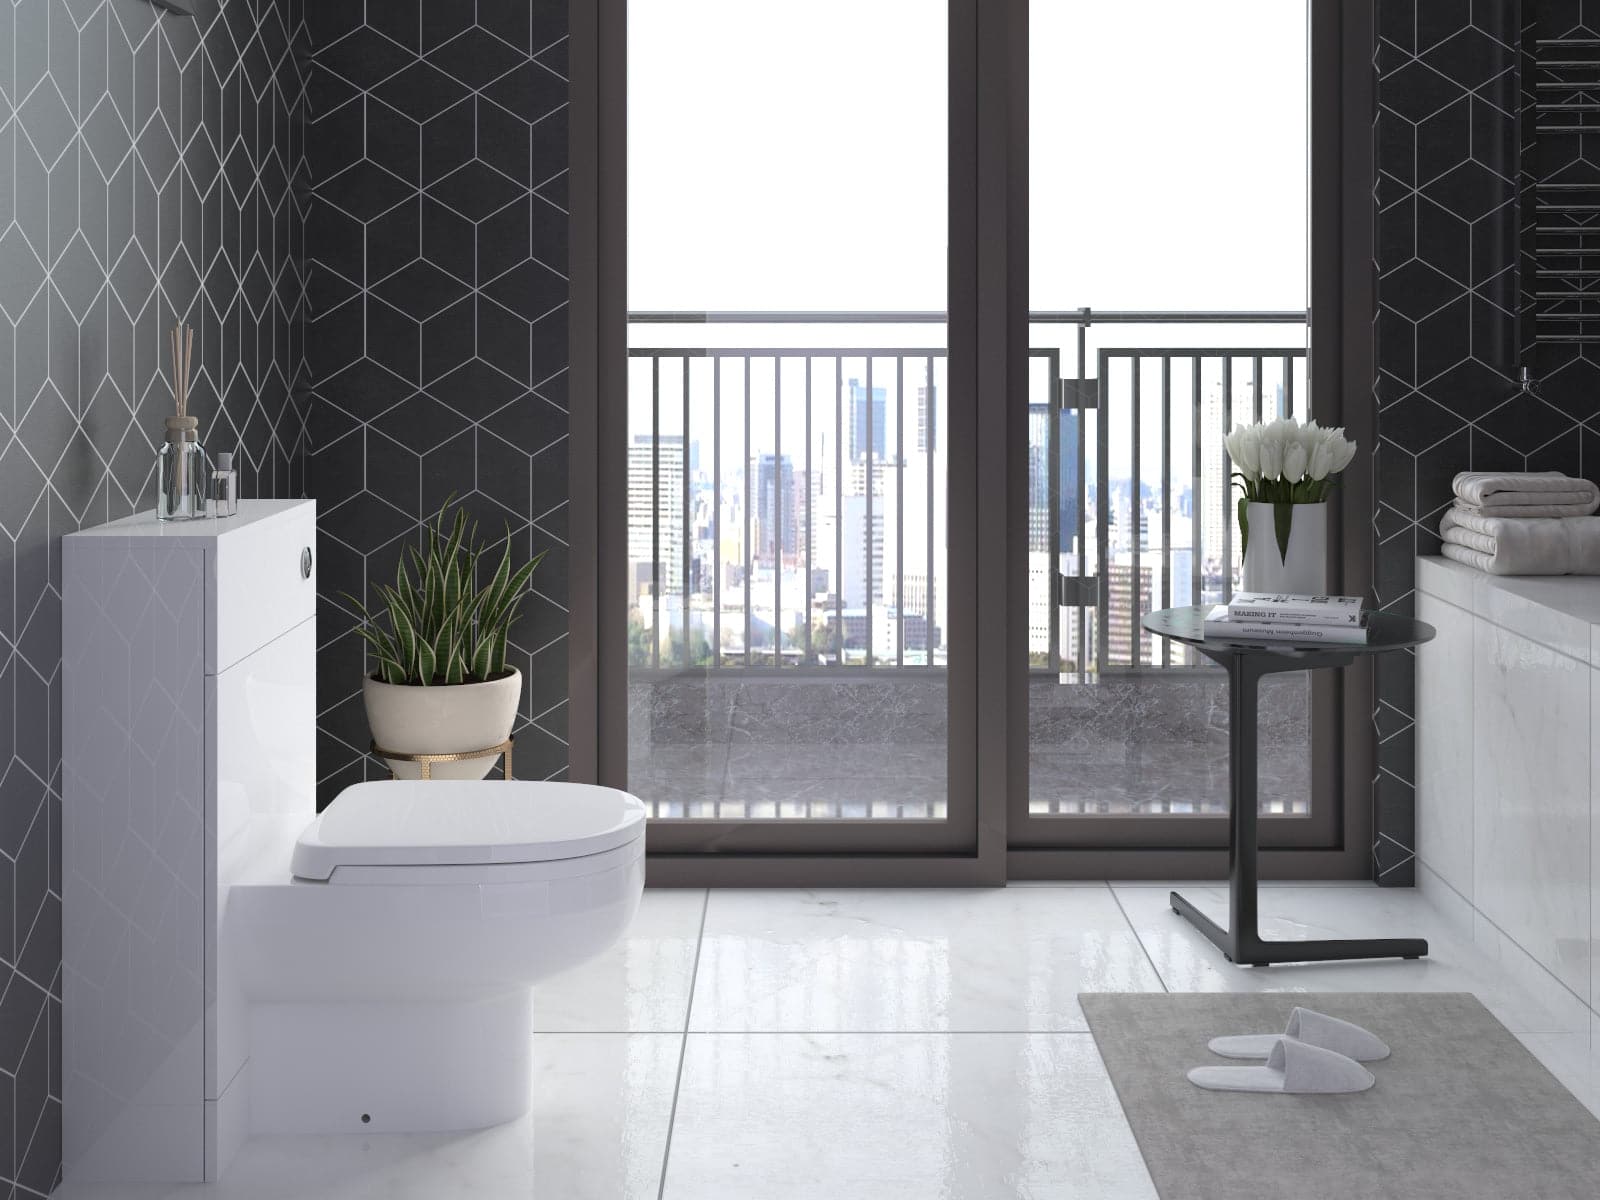 Gamma L Shape Vanity & WC Unit with Toilet - RH - Gloss White featuring a sleek design, space-saving layout, and contemporary style. Ideal for modern UK bathrooms.